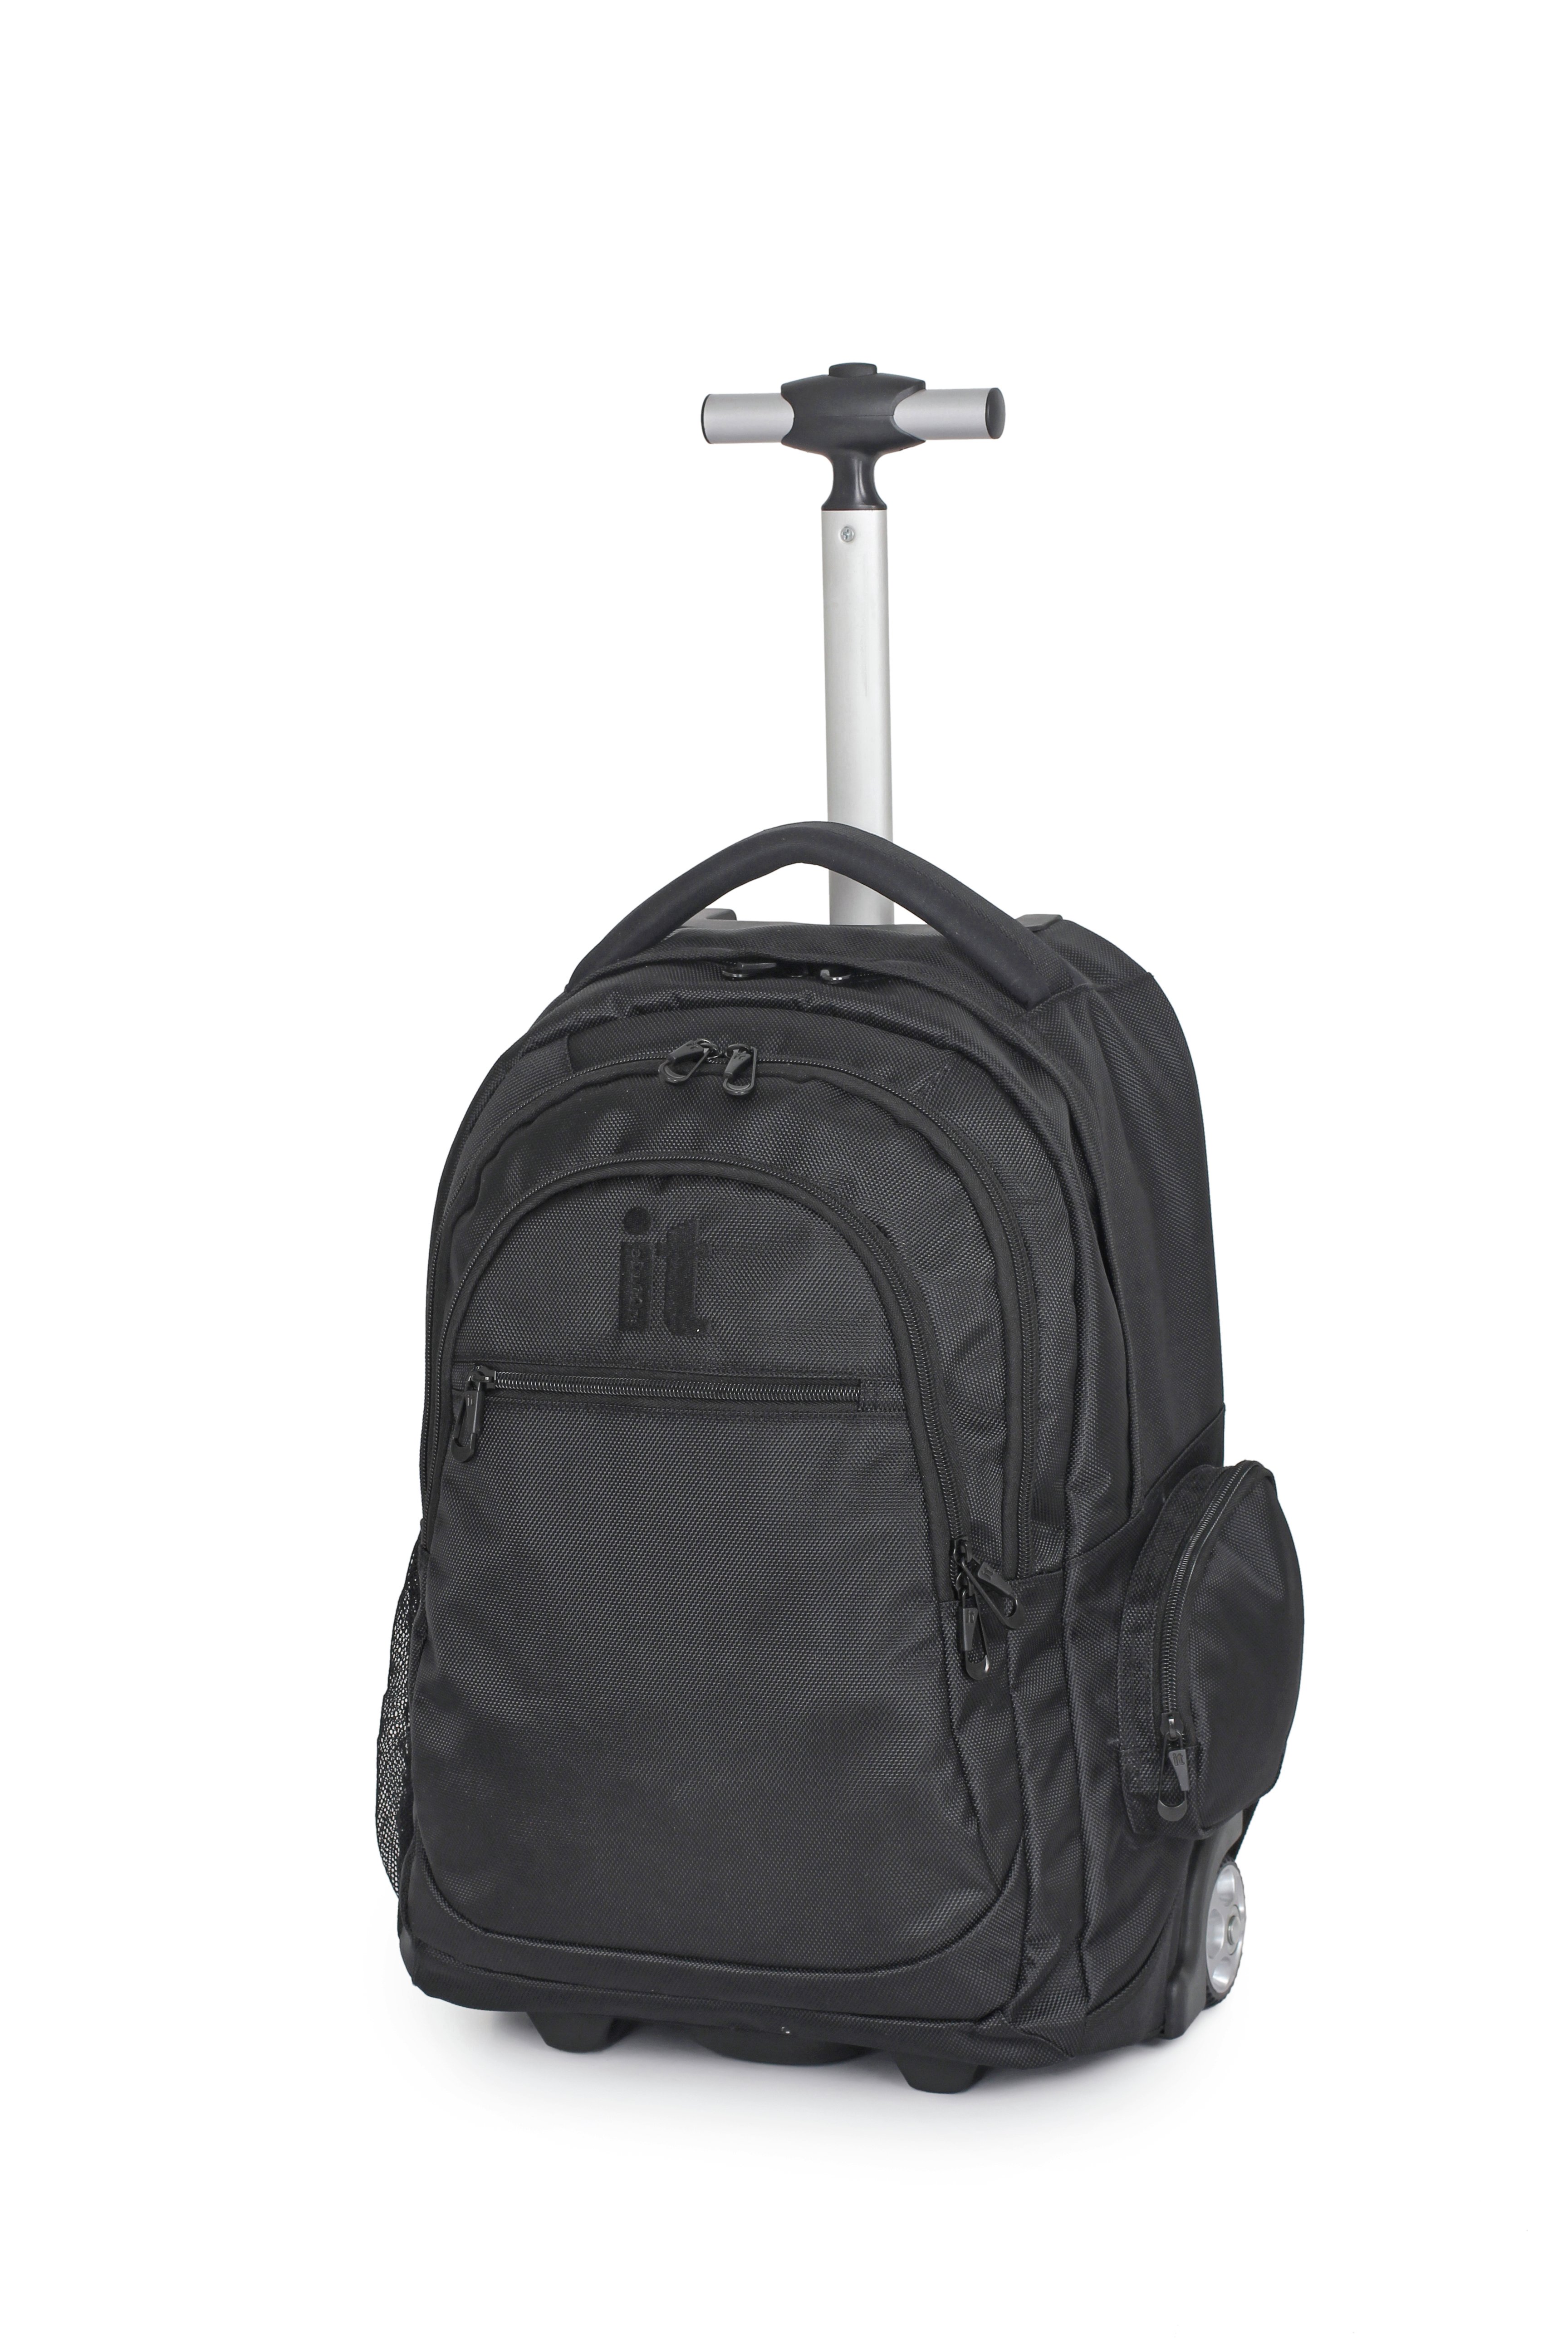 it Luggage 28L Backpack with 2 Wheels - Black (3092091) | Argos Price ...